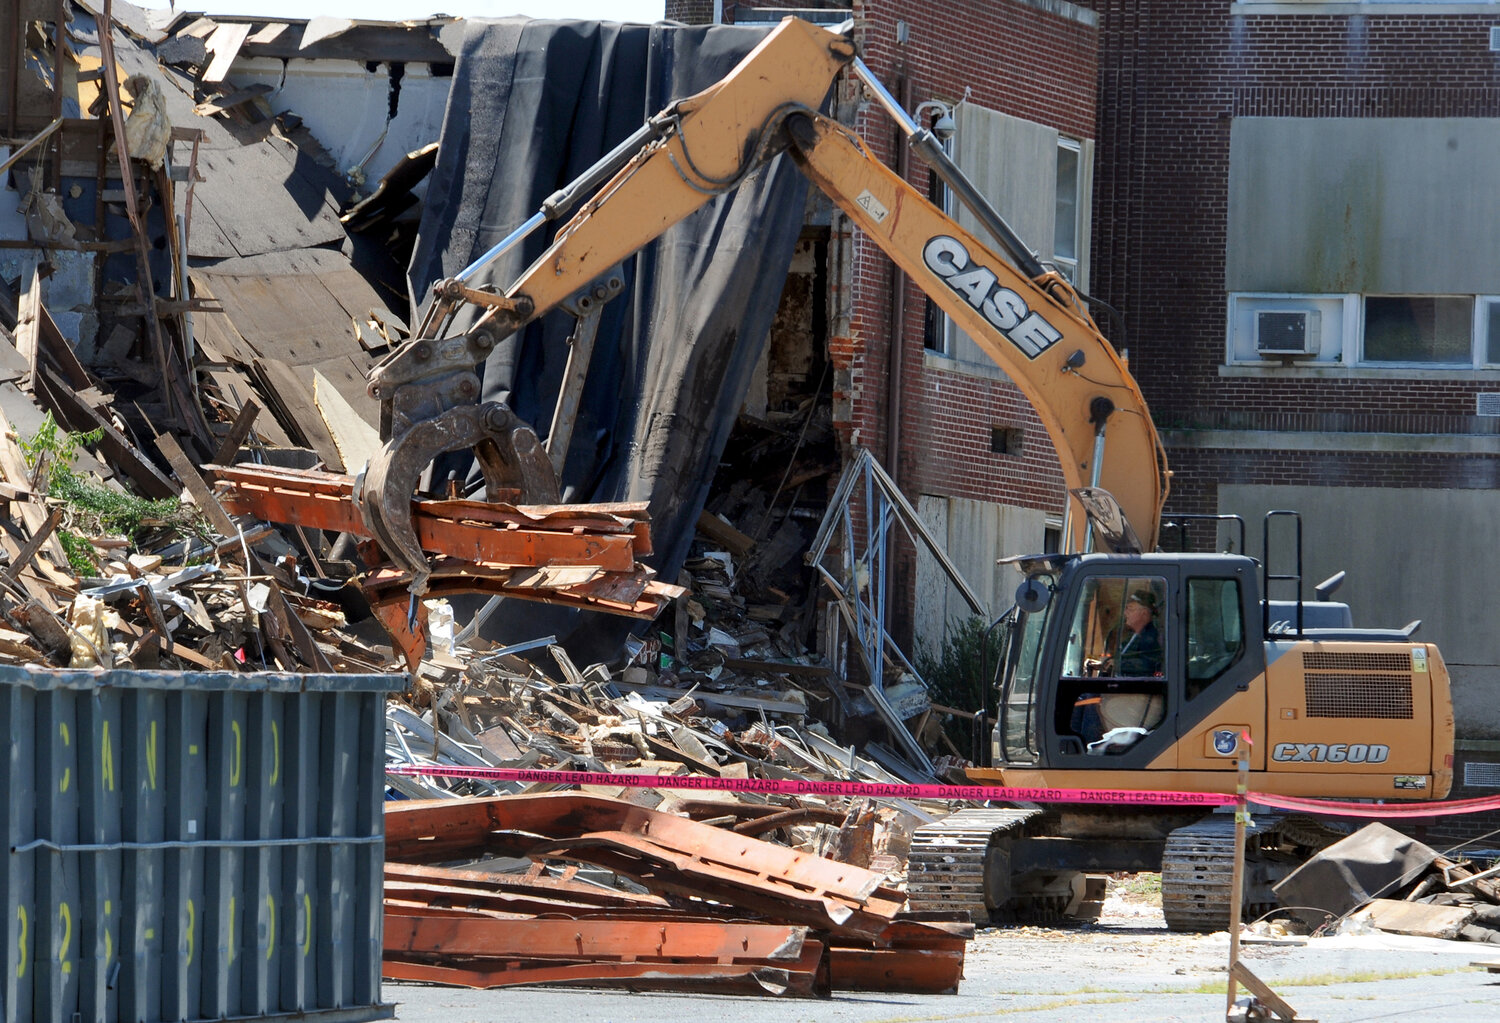 Demolition equipment operator pulling out heavy steel girders from the old Milford Middle School Wednesday.